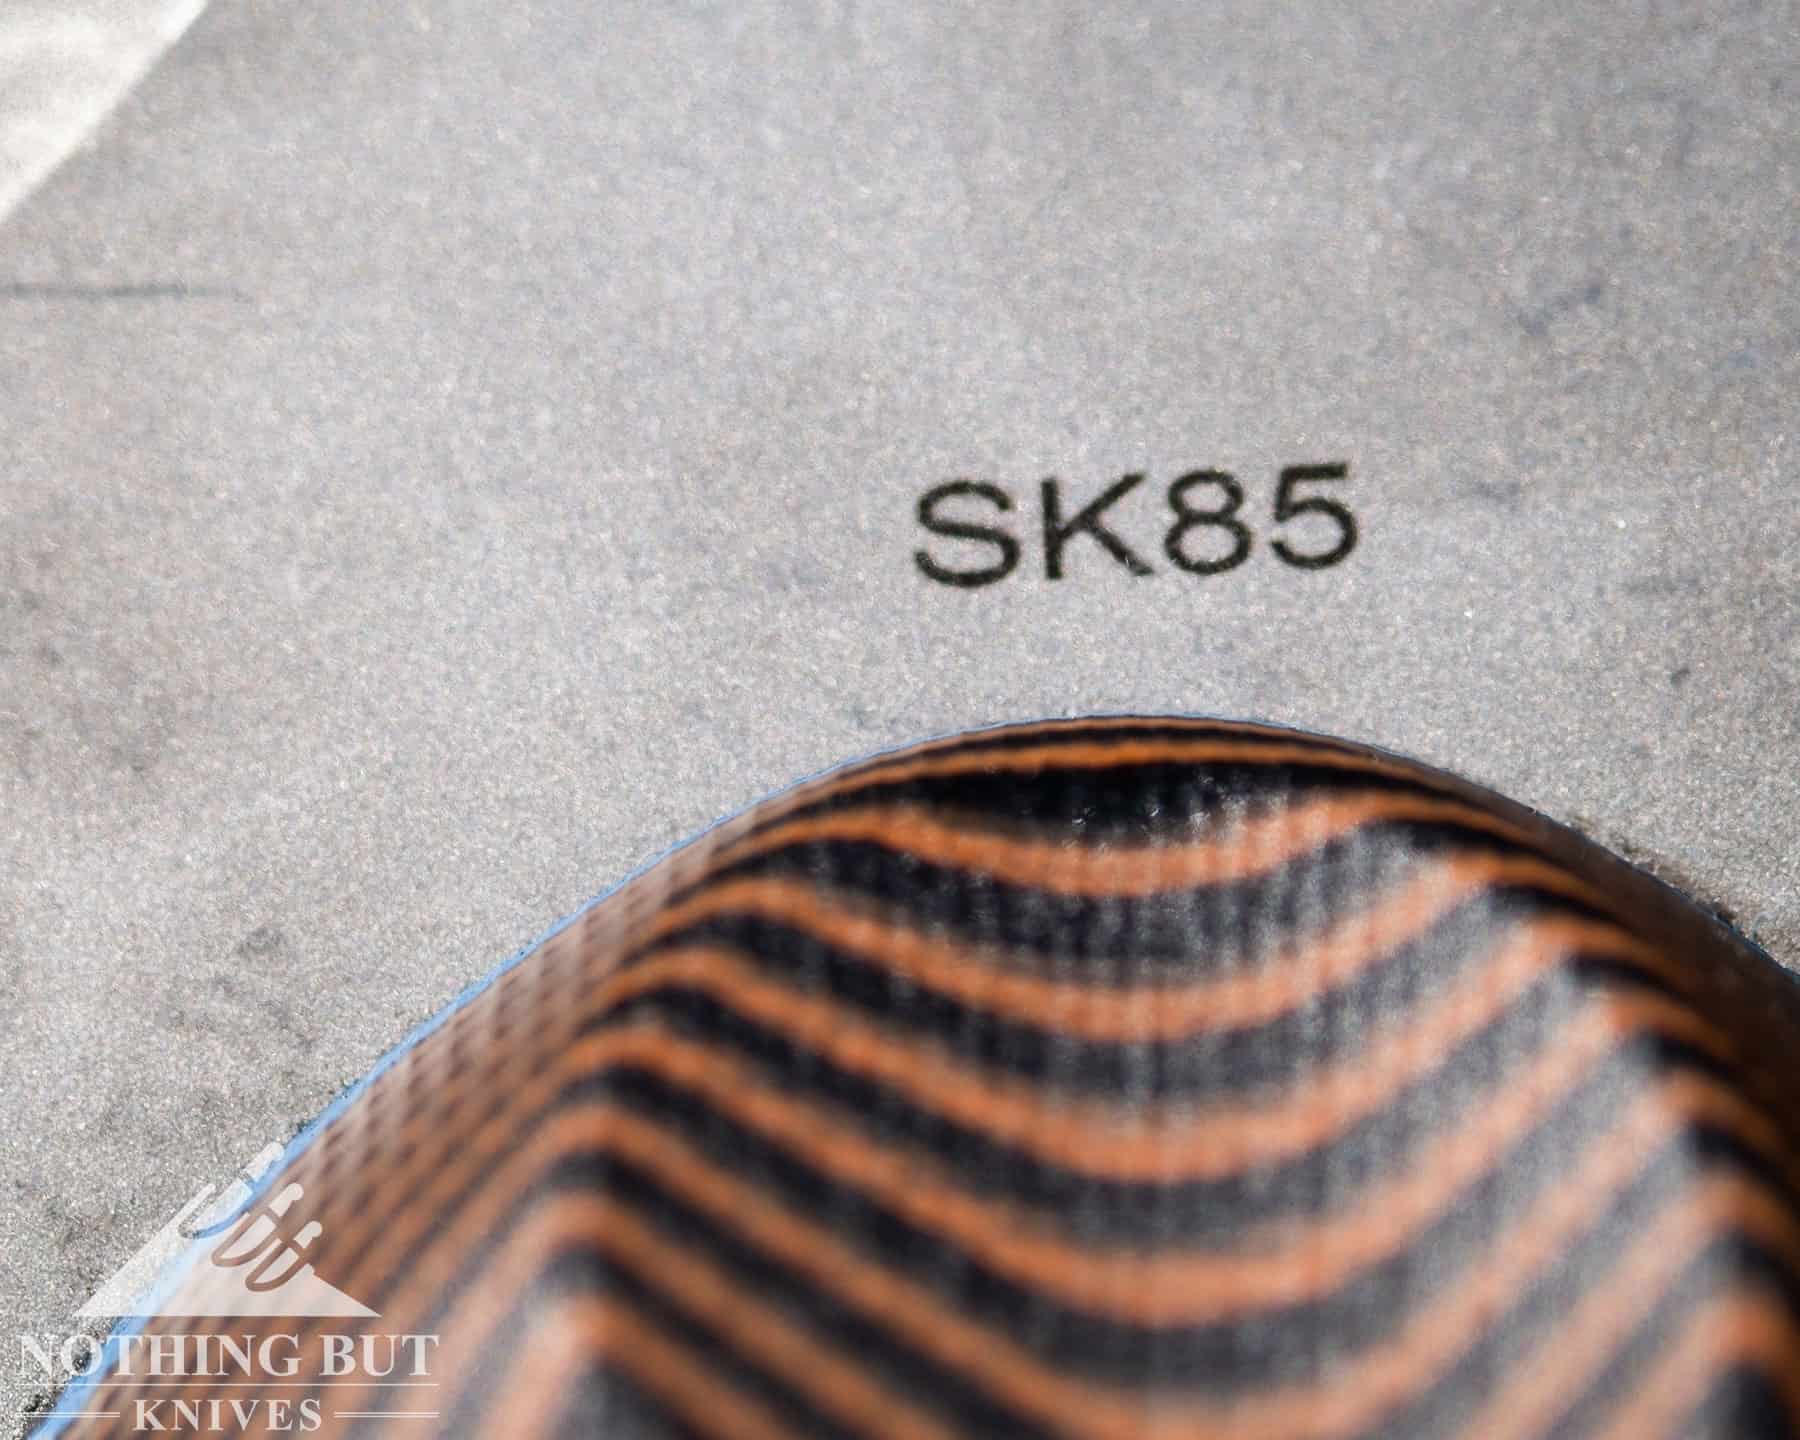 Sk85 steel is a tough steel that is great for outdoor work.